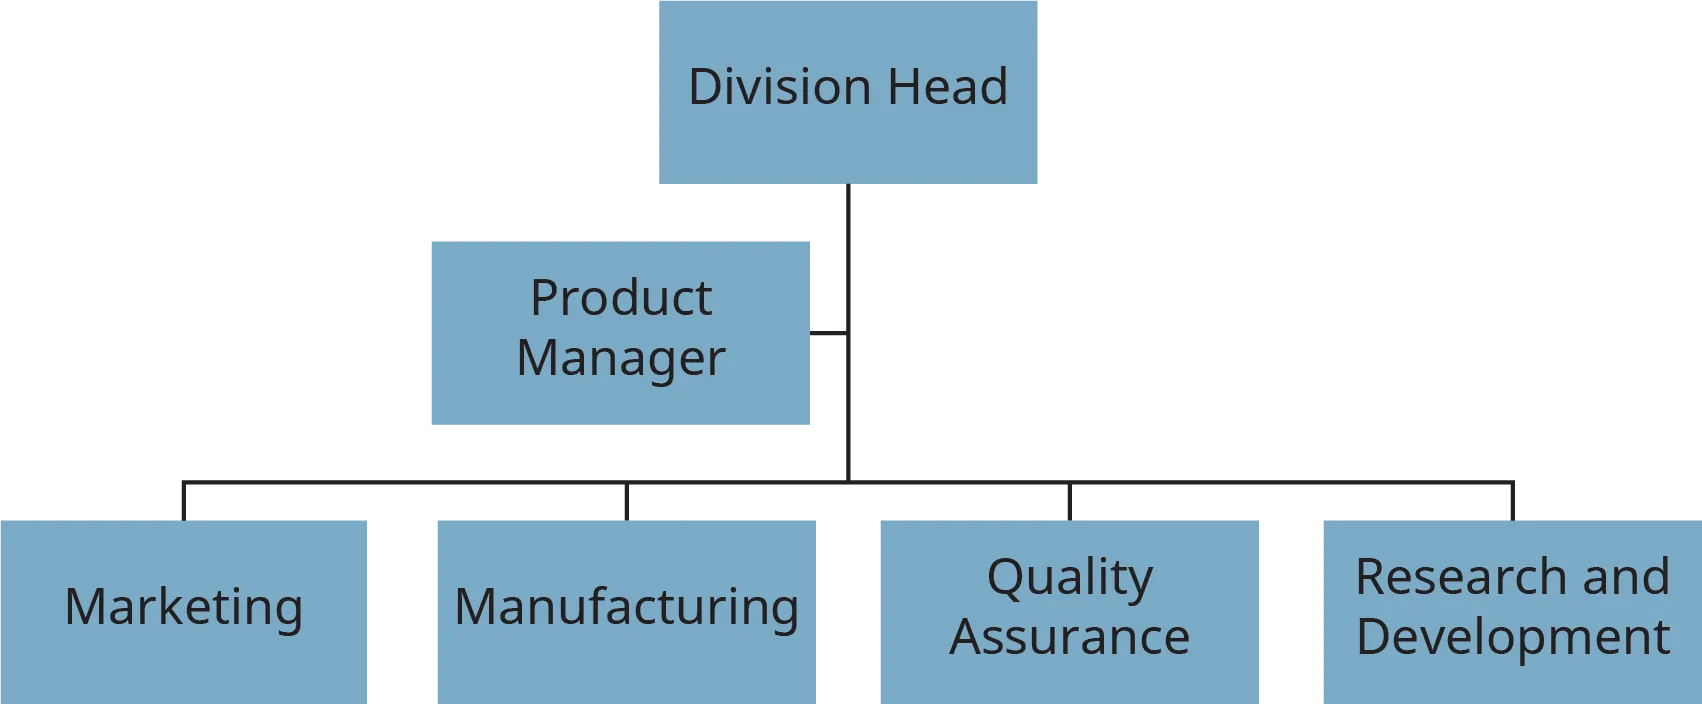 A flowchart shows the product manager acting as a linking manager.